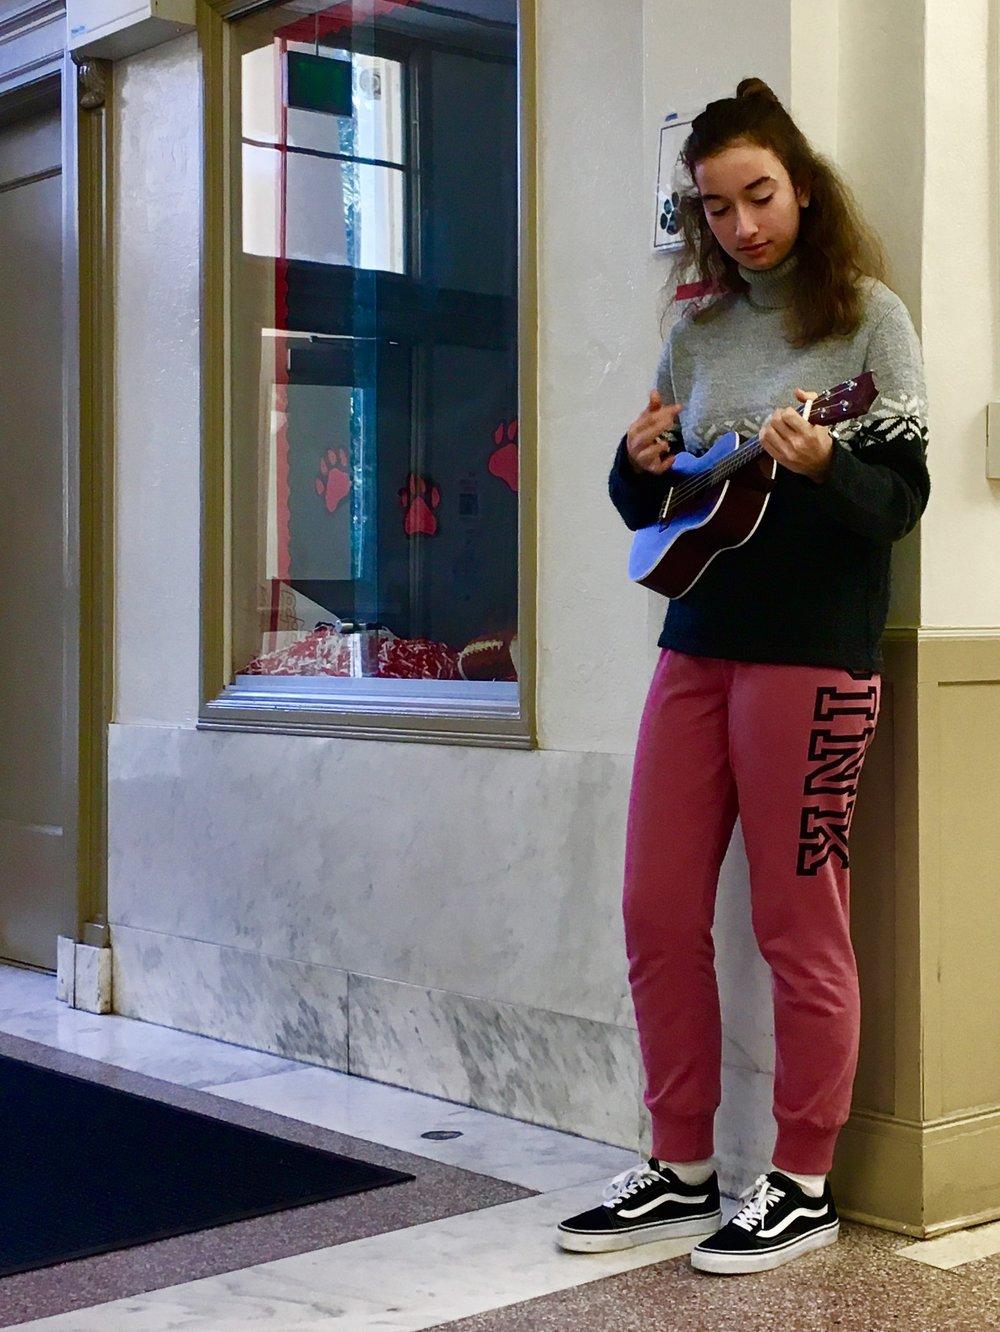  Lily Page jams out on the ukulele for fun. 